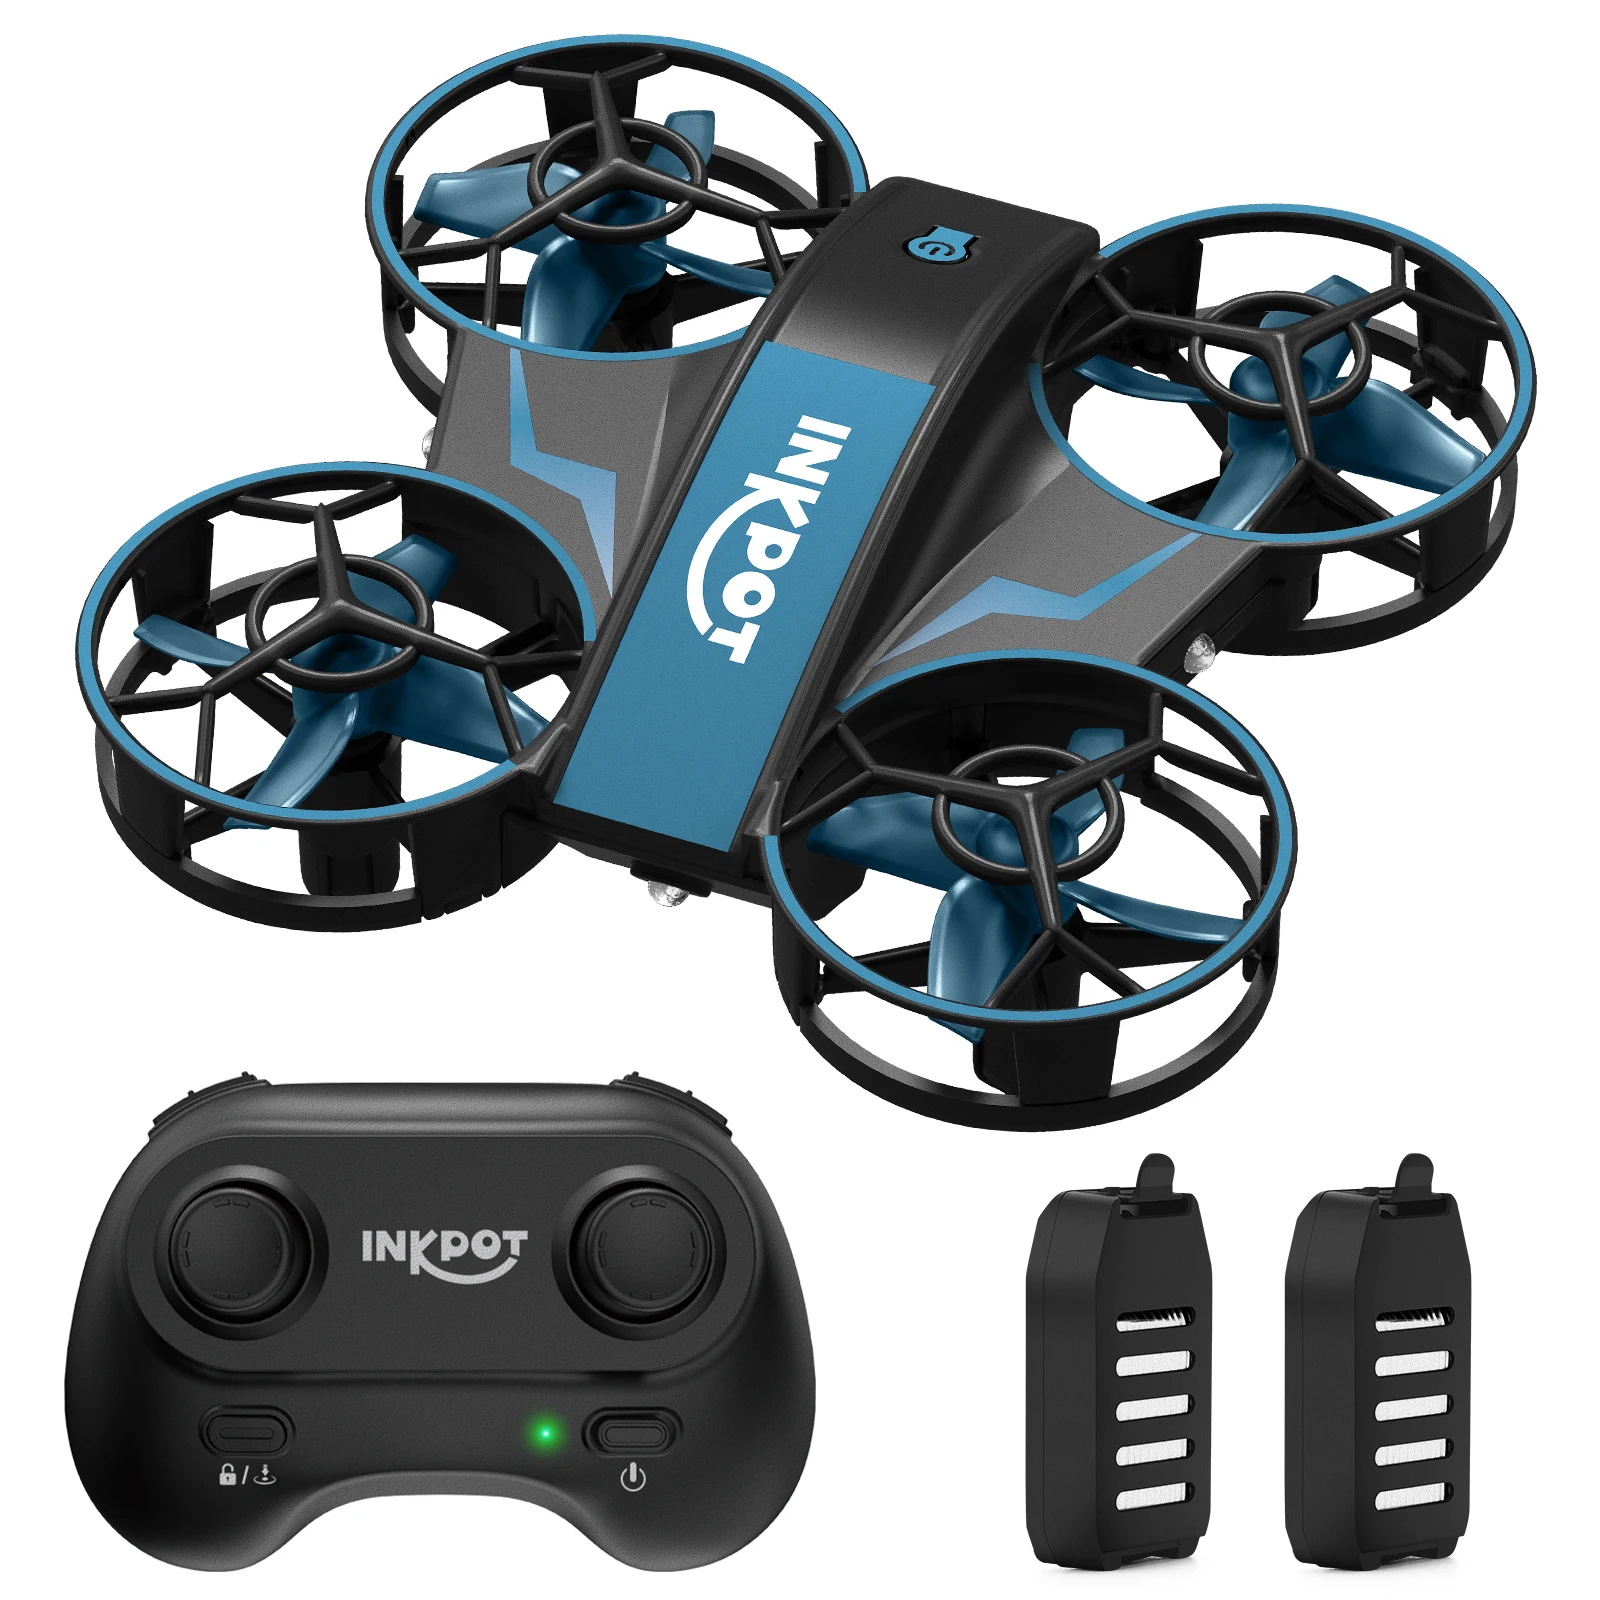 

Mini Drone for Kids, I06 RC Drone Toy with 3 Level Mode for Beginners, Indoor Quadcopter Toys for Boys Girls Chirstmas Gift